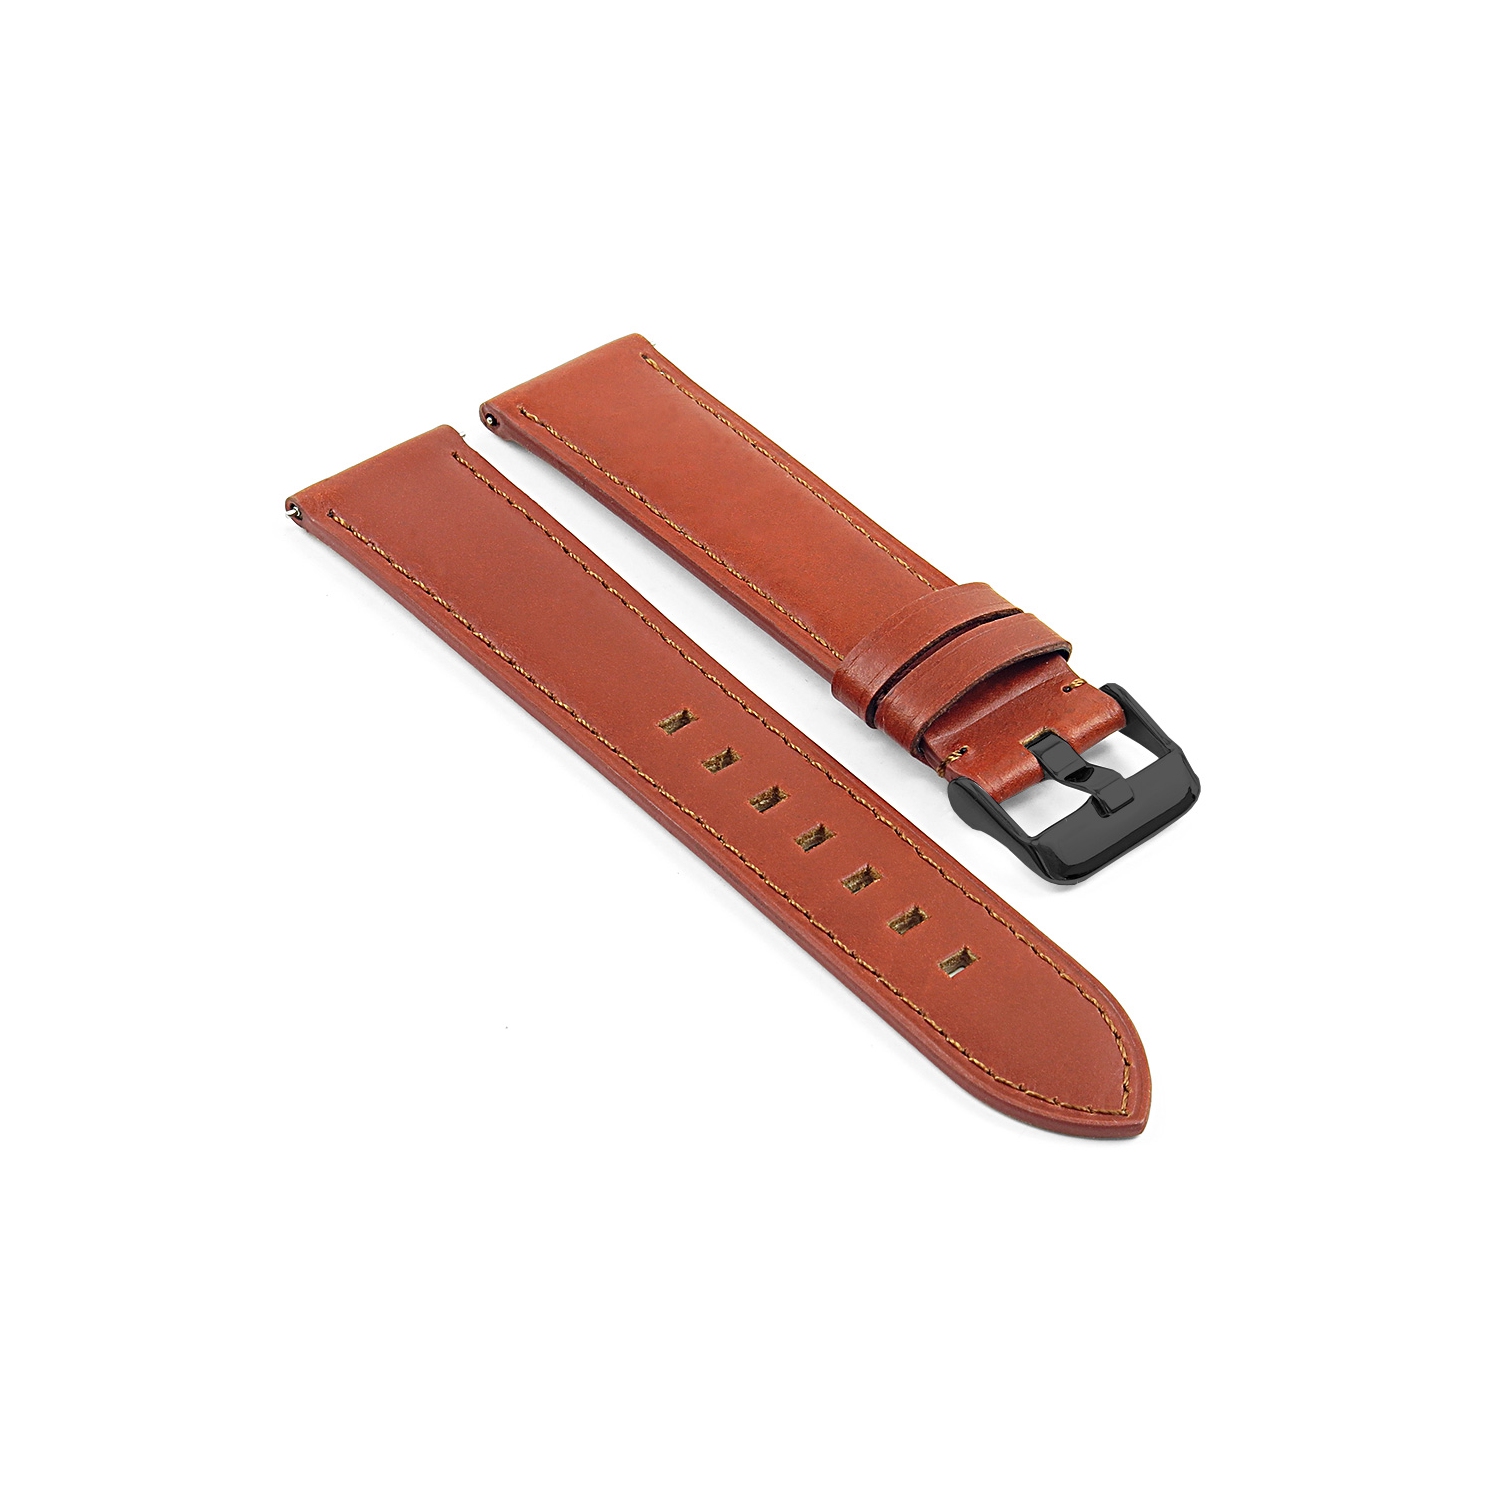 DASSARI Smooth Italian Leather Watch Band Strap for Samsung Gear S3 Frontier - Brown